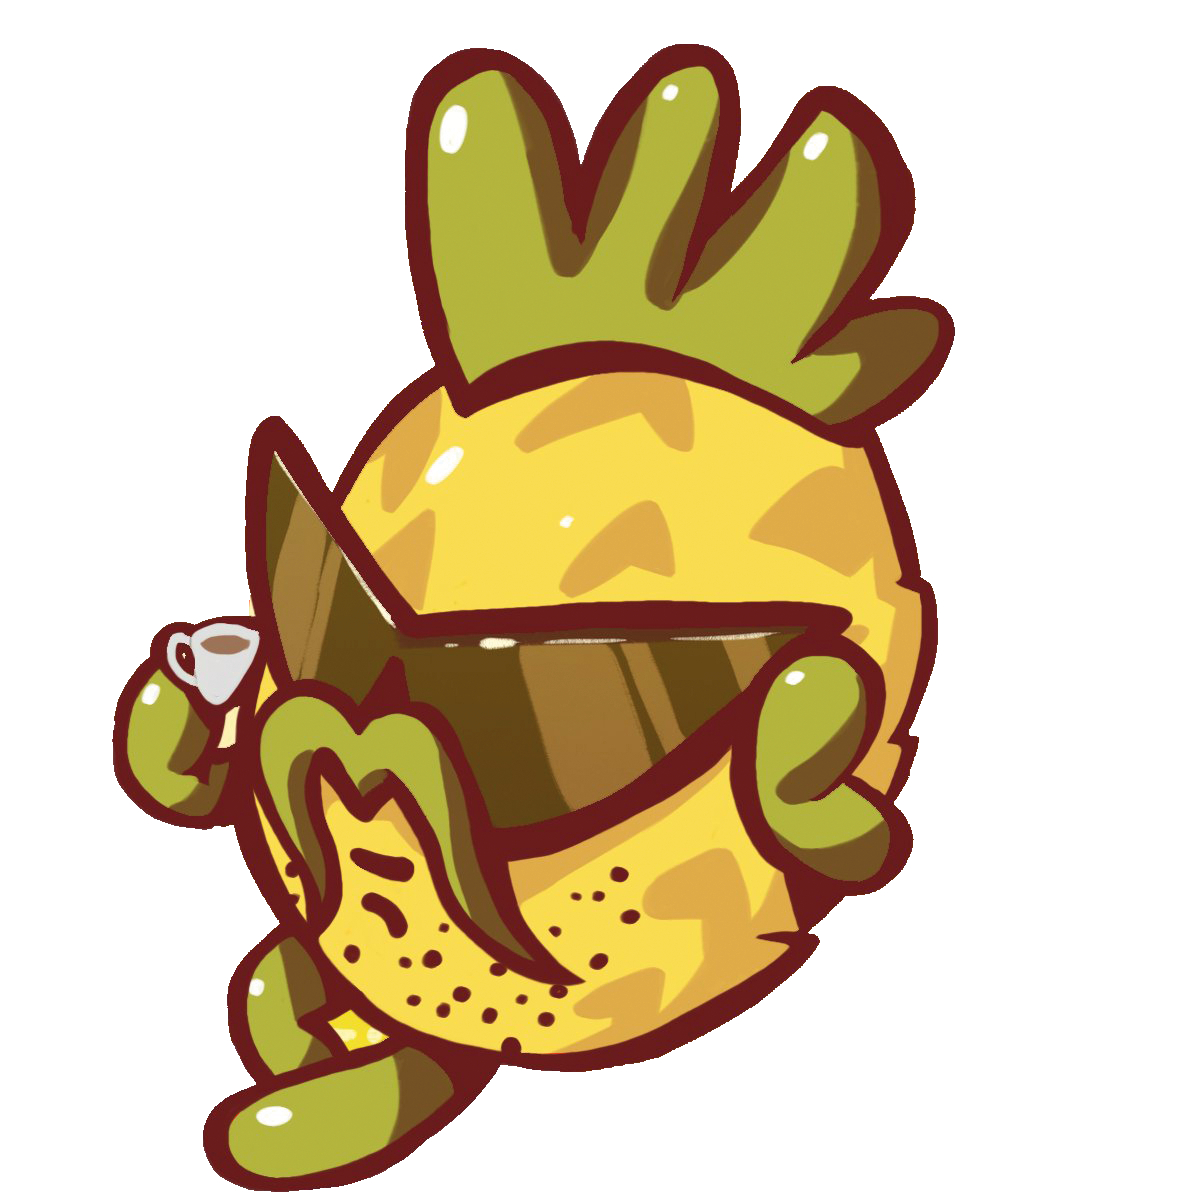 Illustration of berry wearing shades and holding cup of tea